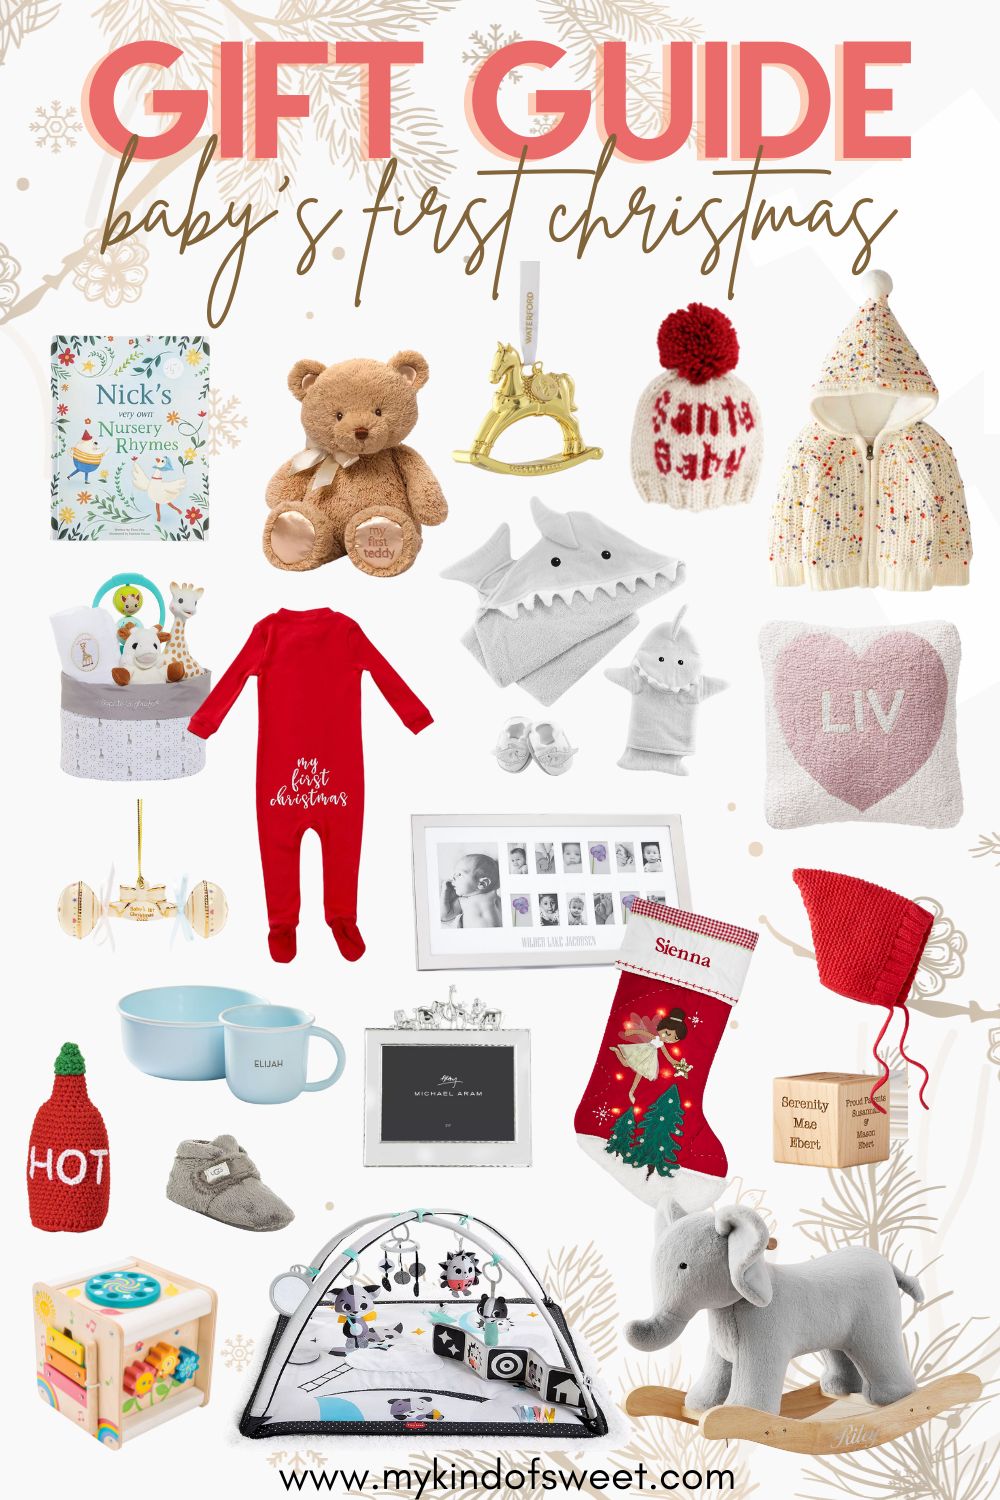 Gift Guide for Baby's First Christmas